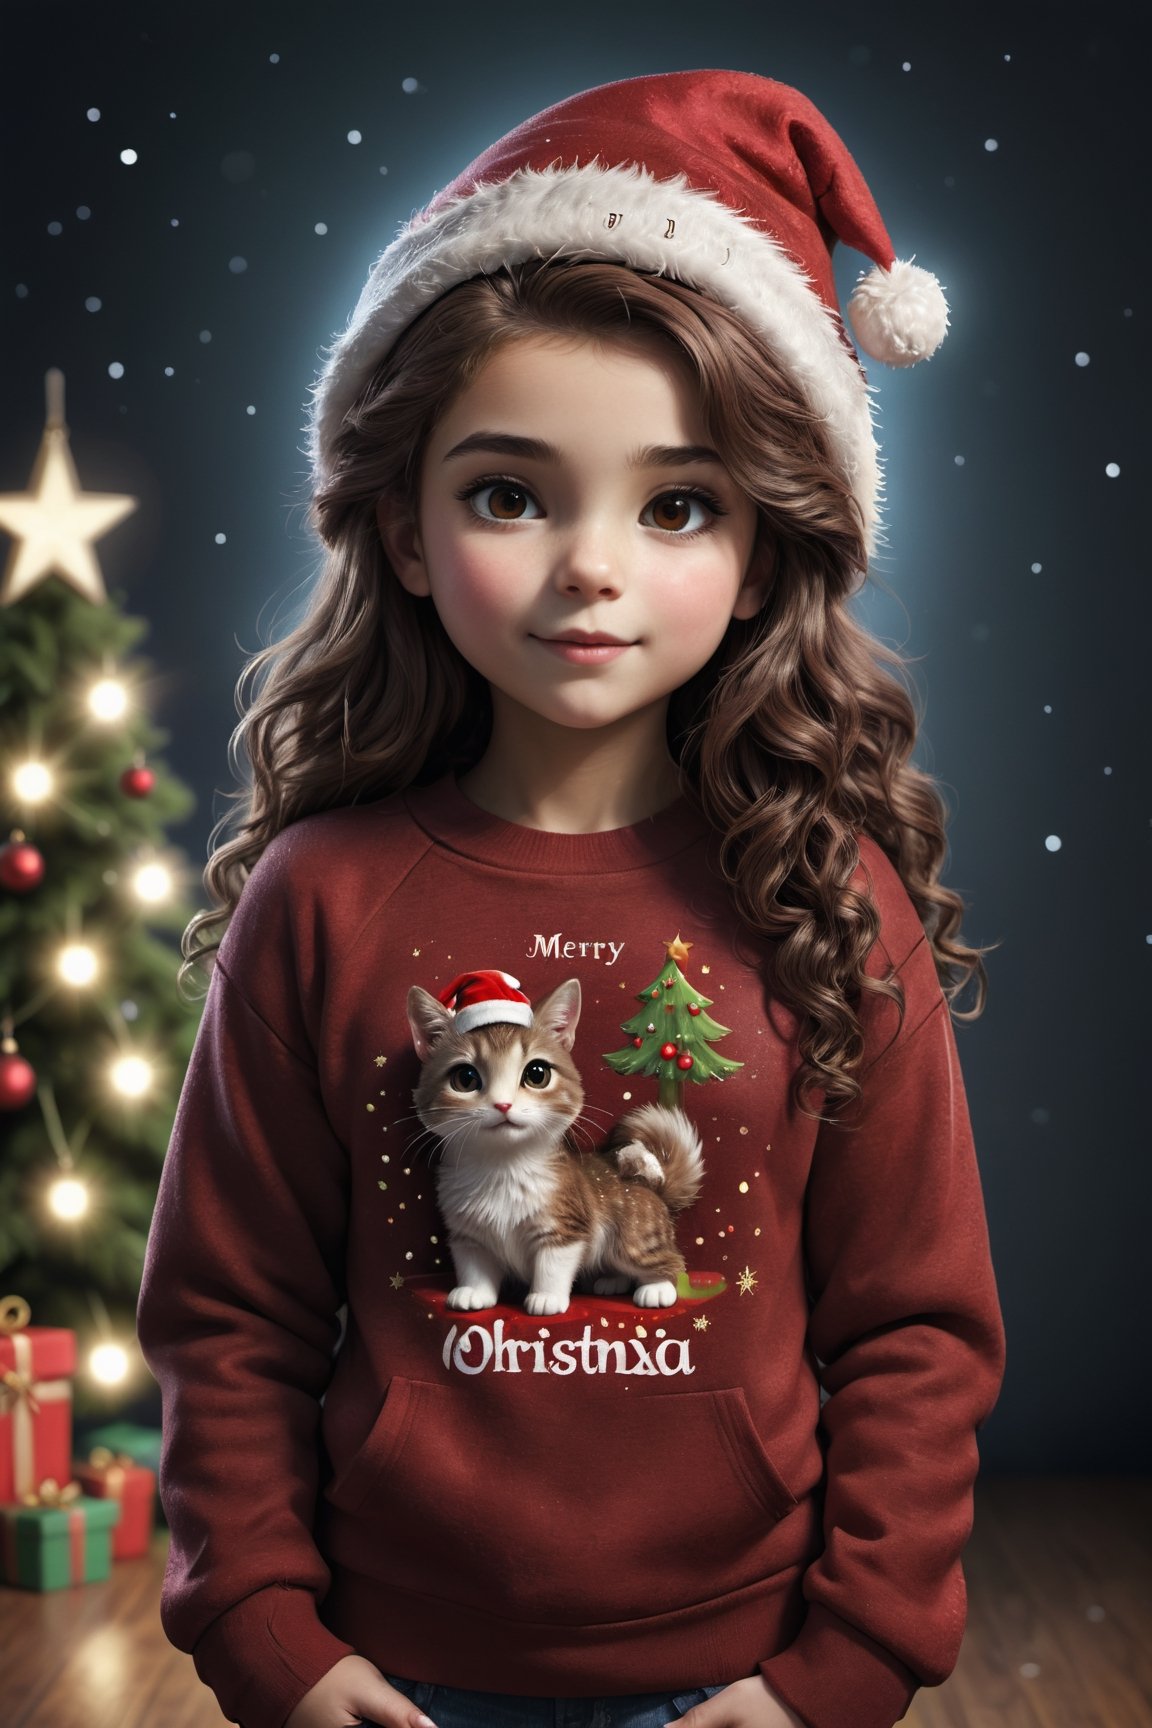 A hyperrealistic Cute cartoon style girl, tender and sweet. standing straight, looking to the front , dressed in a dark red fluffy sweatshirt with the , broun long curly hair, Christmas hat with in name osmary" rex colors and light sparkles. Name "ALEXIA"., typography, 3d render, painting, no background